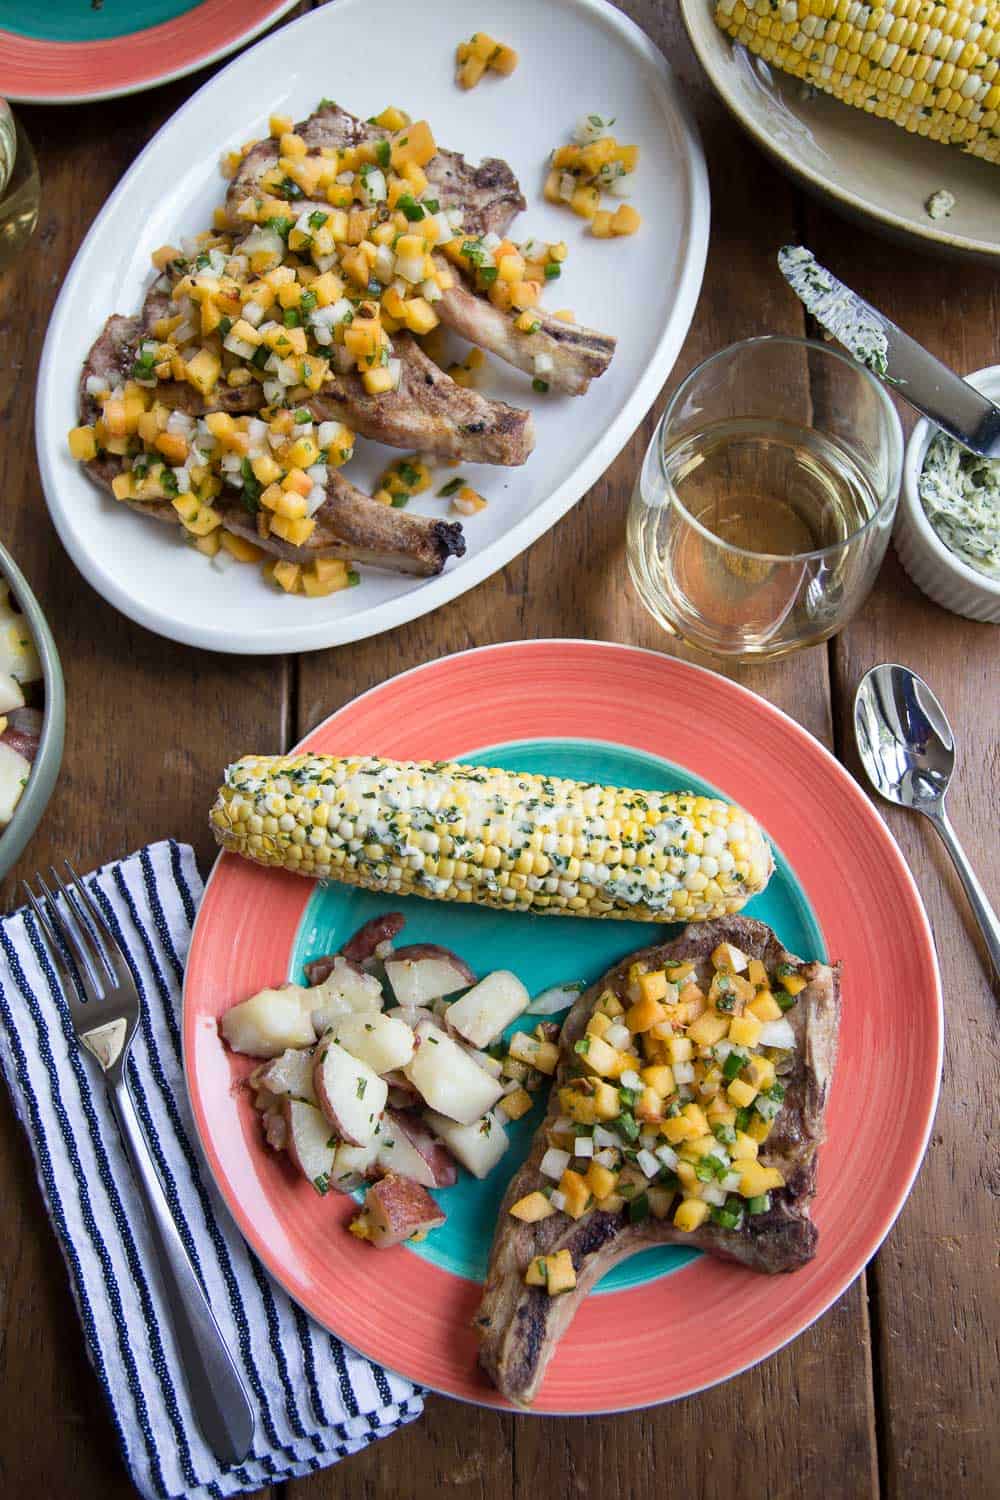 brightly colored dinner plate with pork chops, corn on the cob, and potato salad.